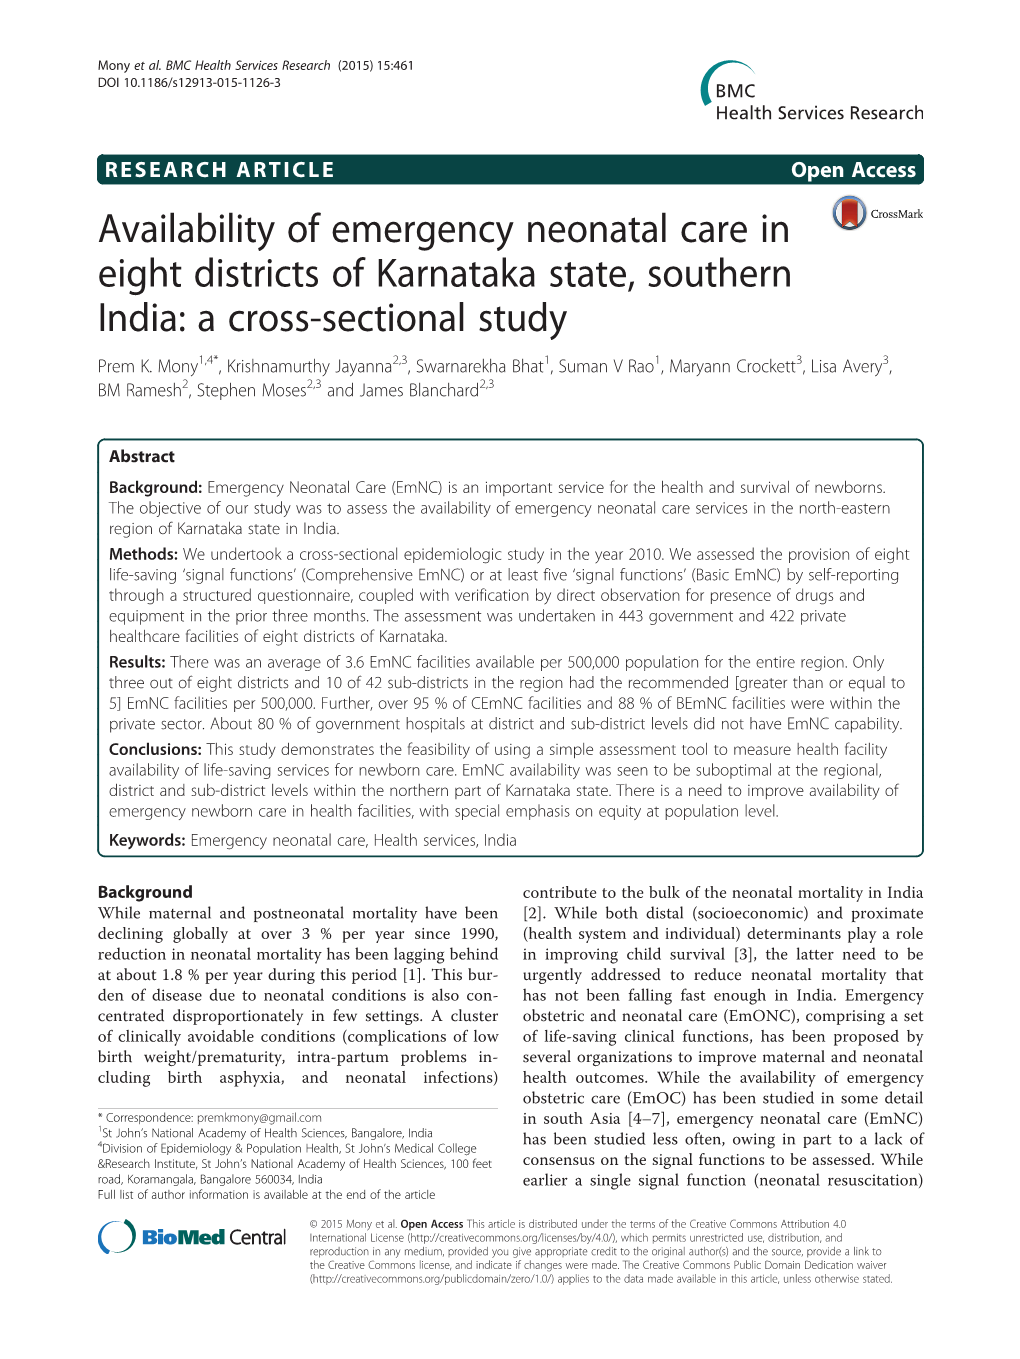 Availability of Emergency Neonatal Care in Eight Districts of Karnataka State, Southern India: a Cross-Sectional Study Prem K